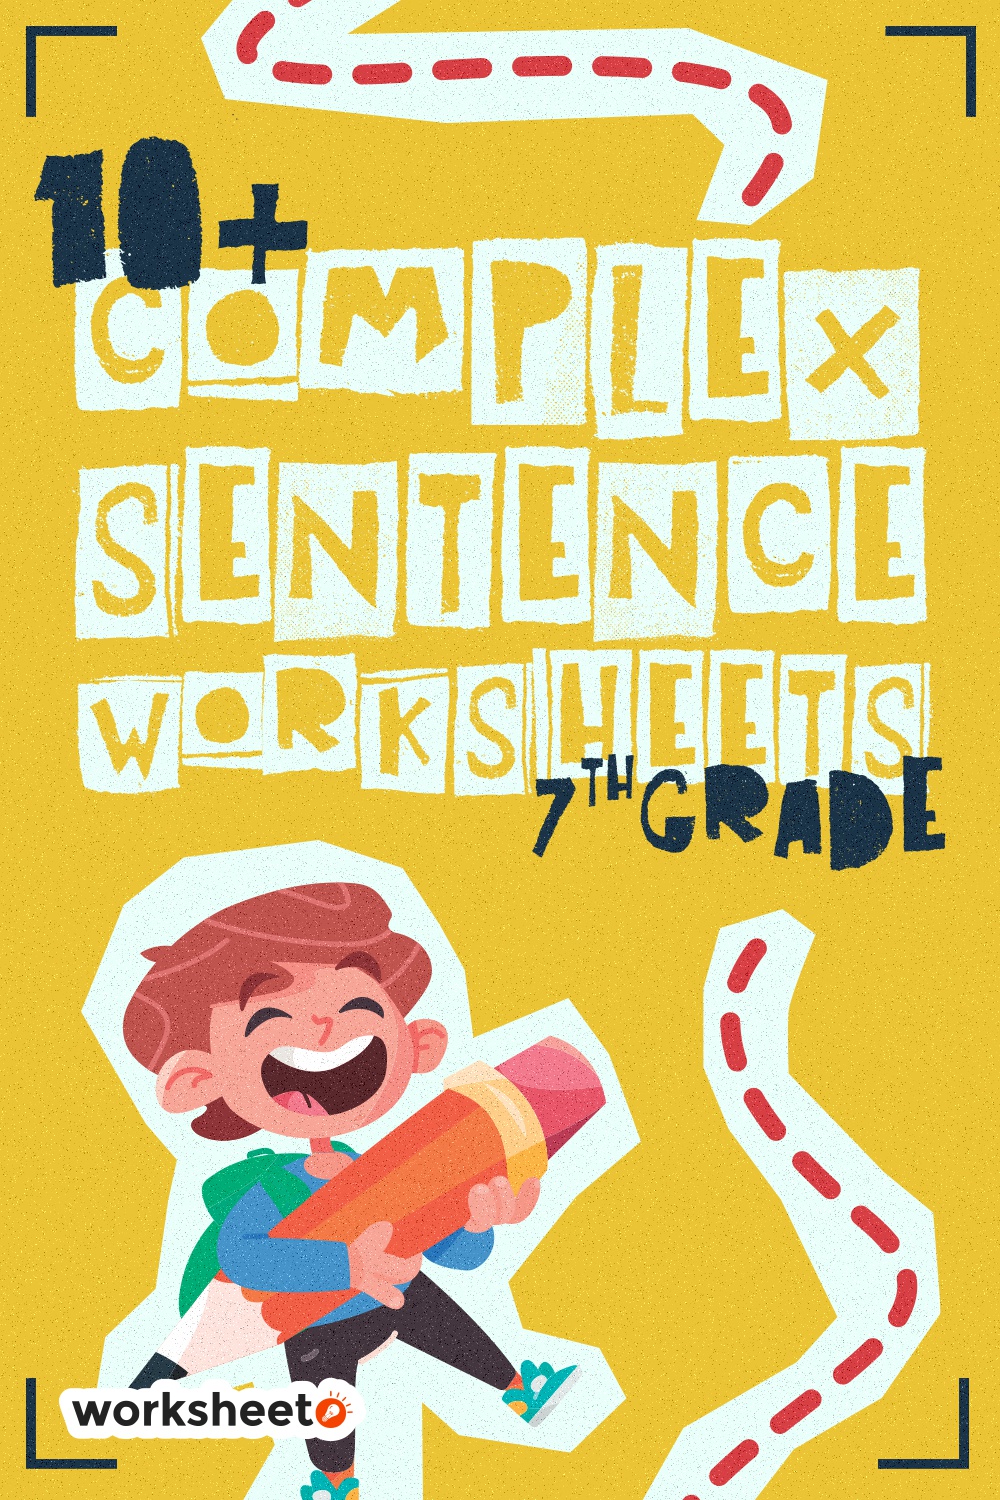 15 Images of Complex Sentence Worksheets 7th Grade